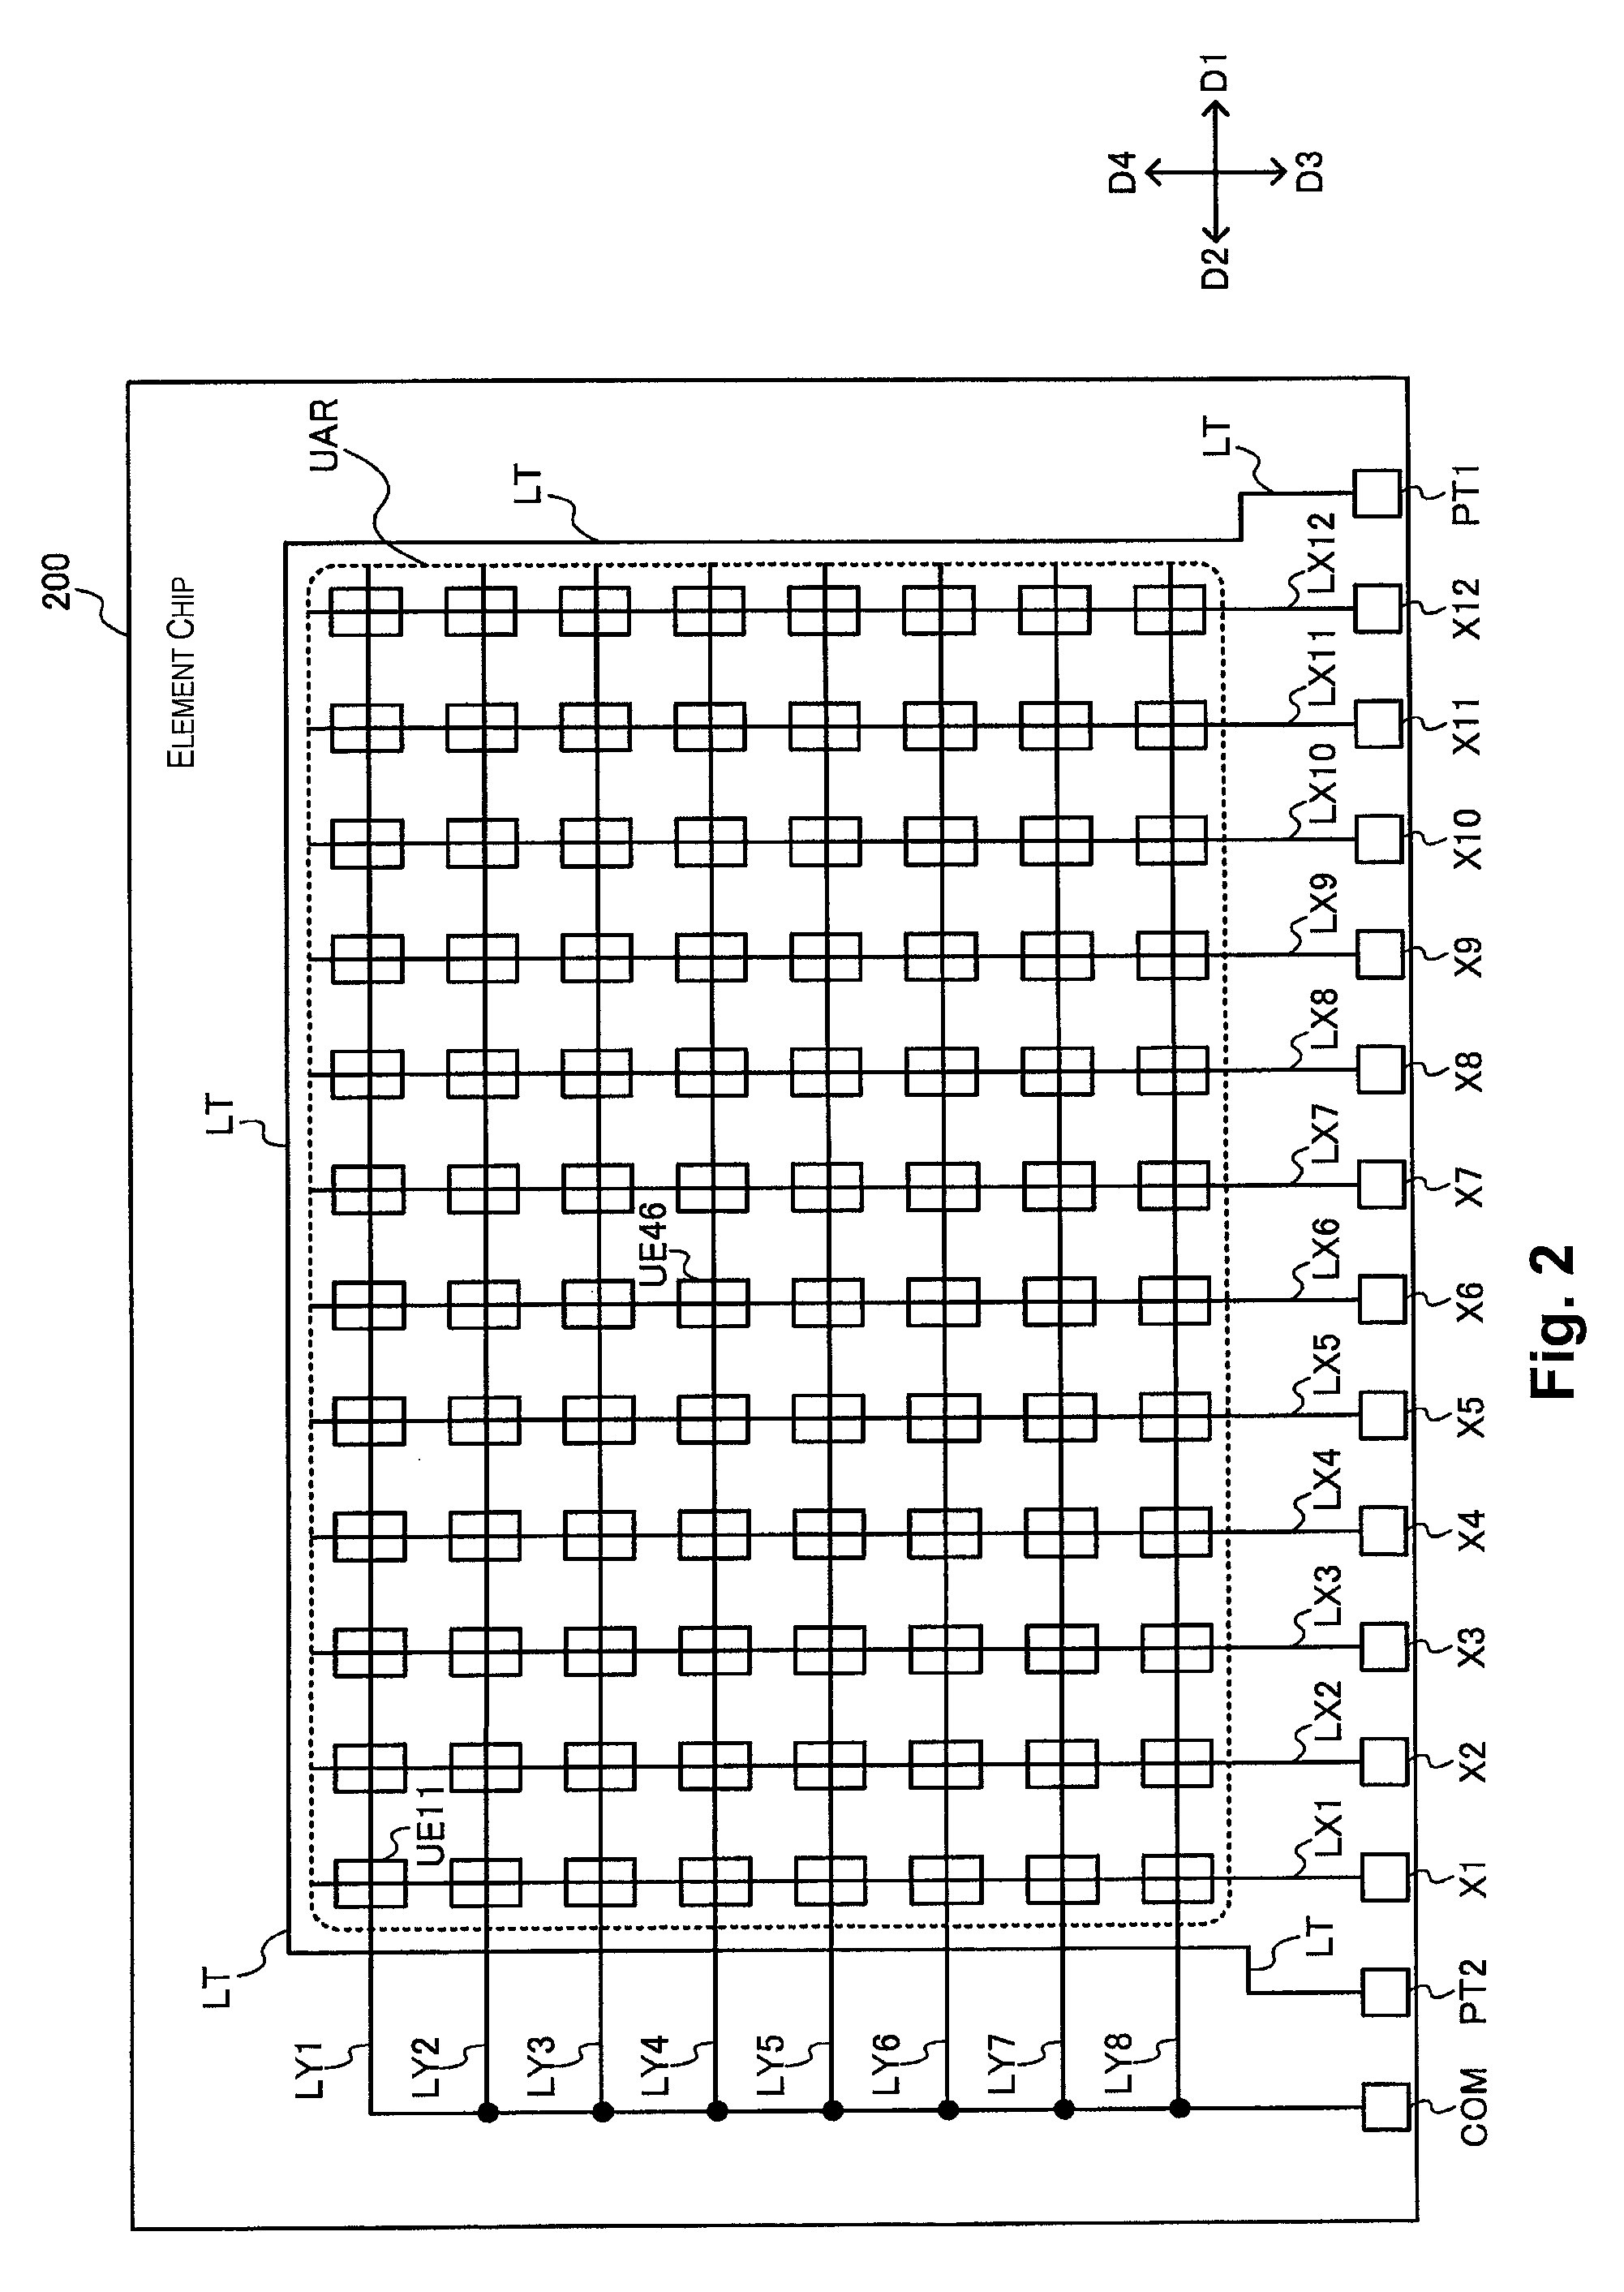 Head unit, ultrasonic probe, electronic instrument, and diagnostic device